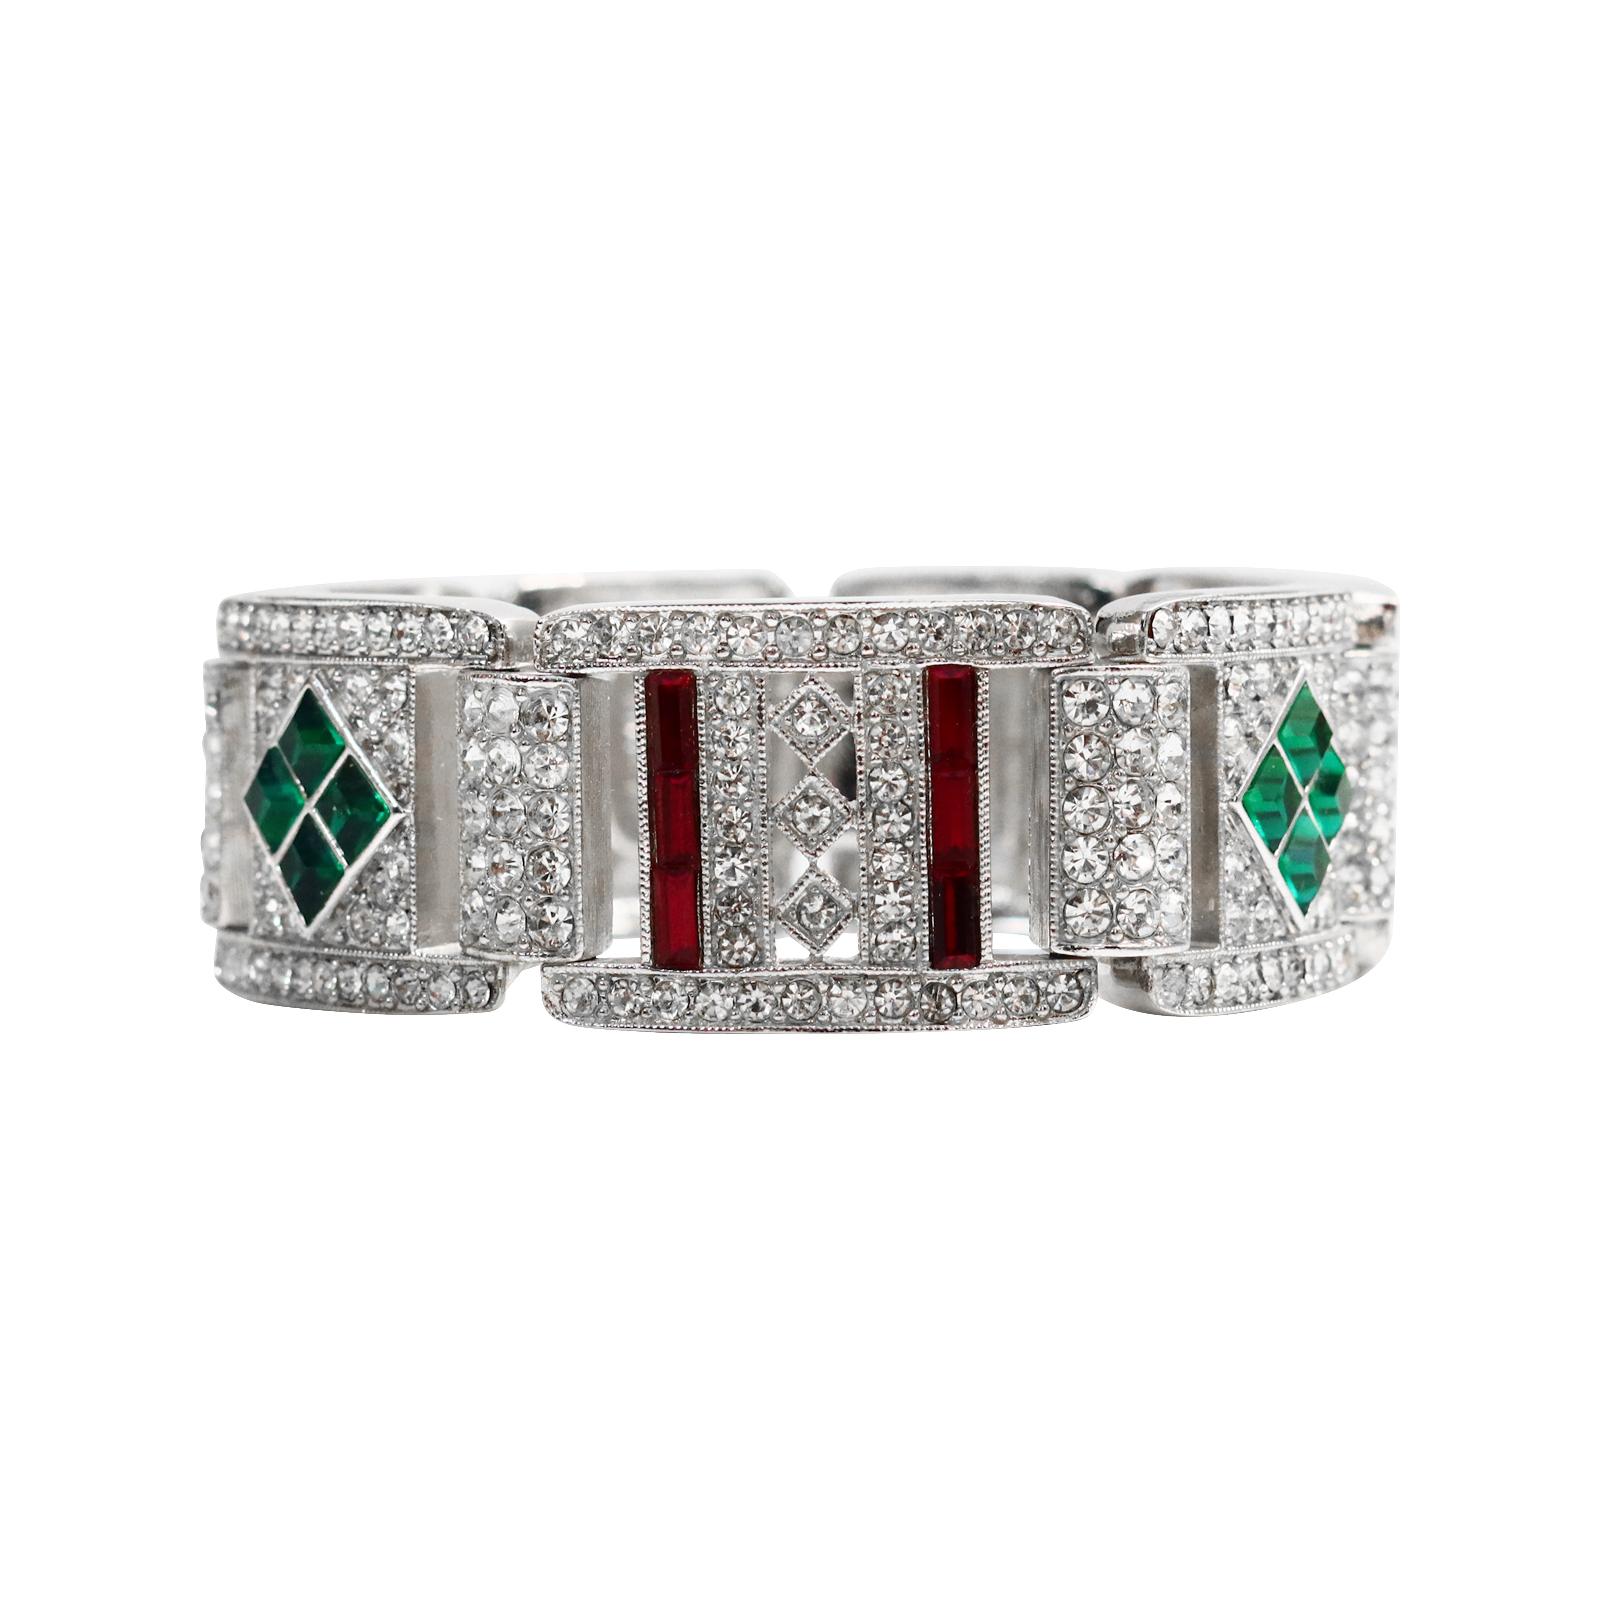 Modern Vintage Art Deco 89 Faux Emerald, Ruby and Crystal Bracelet Circa 1980s For Sale